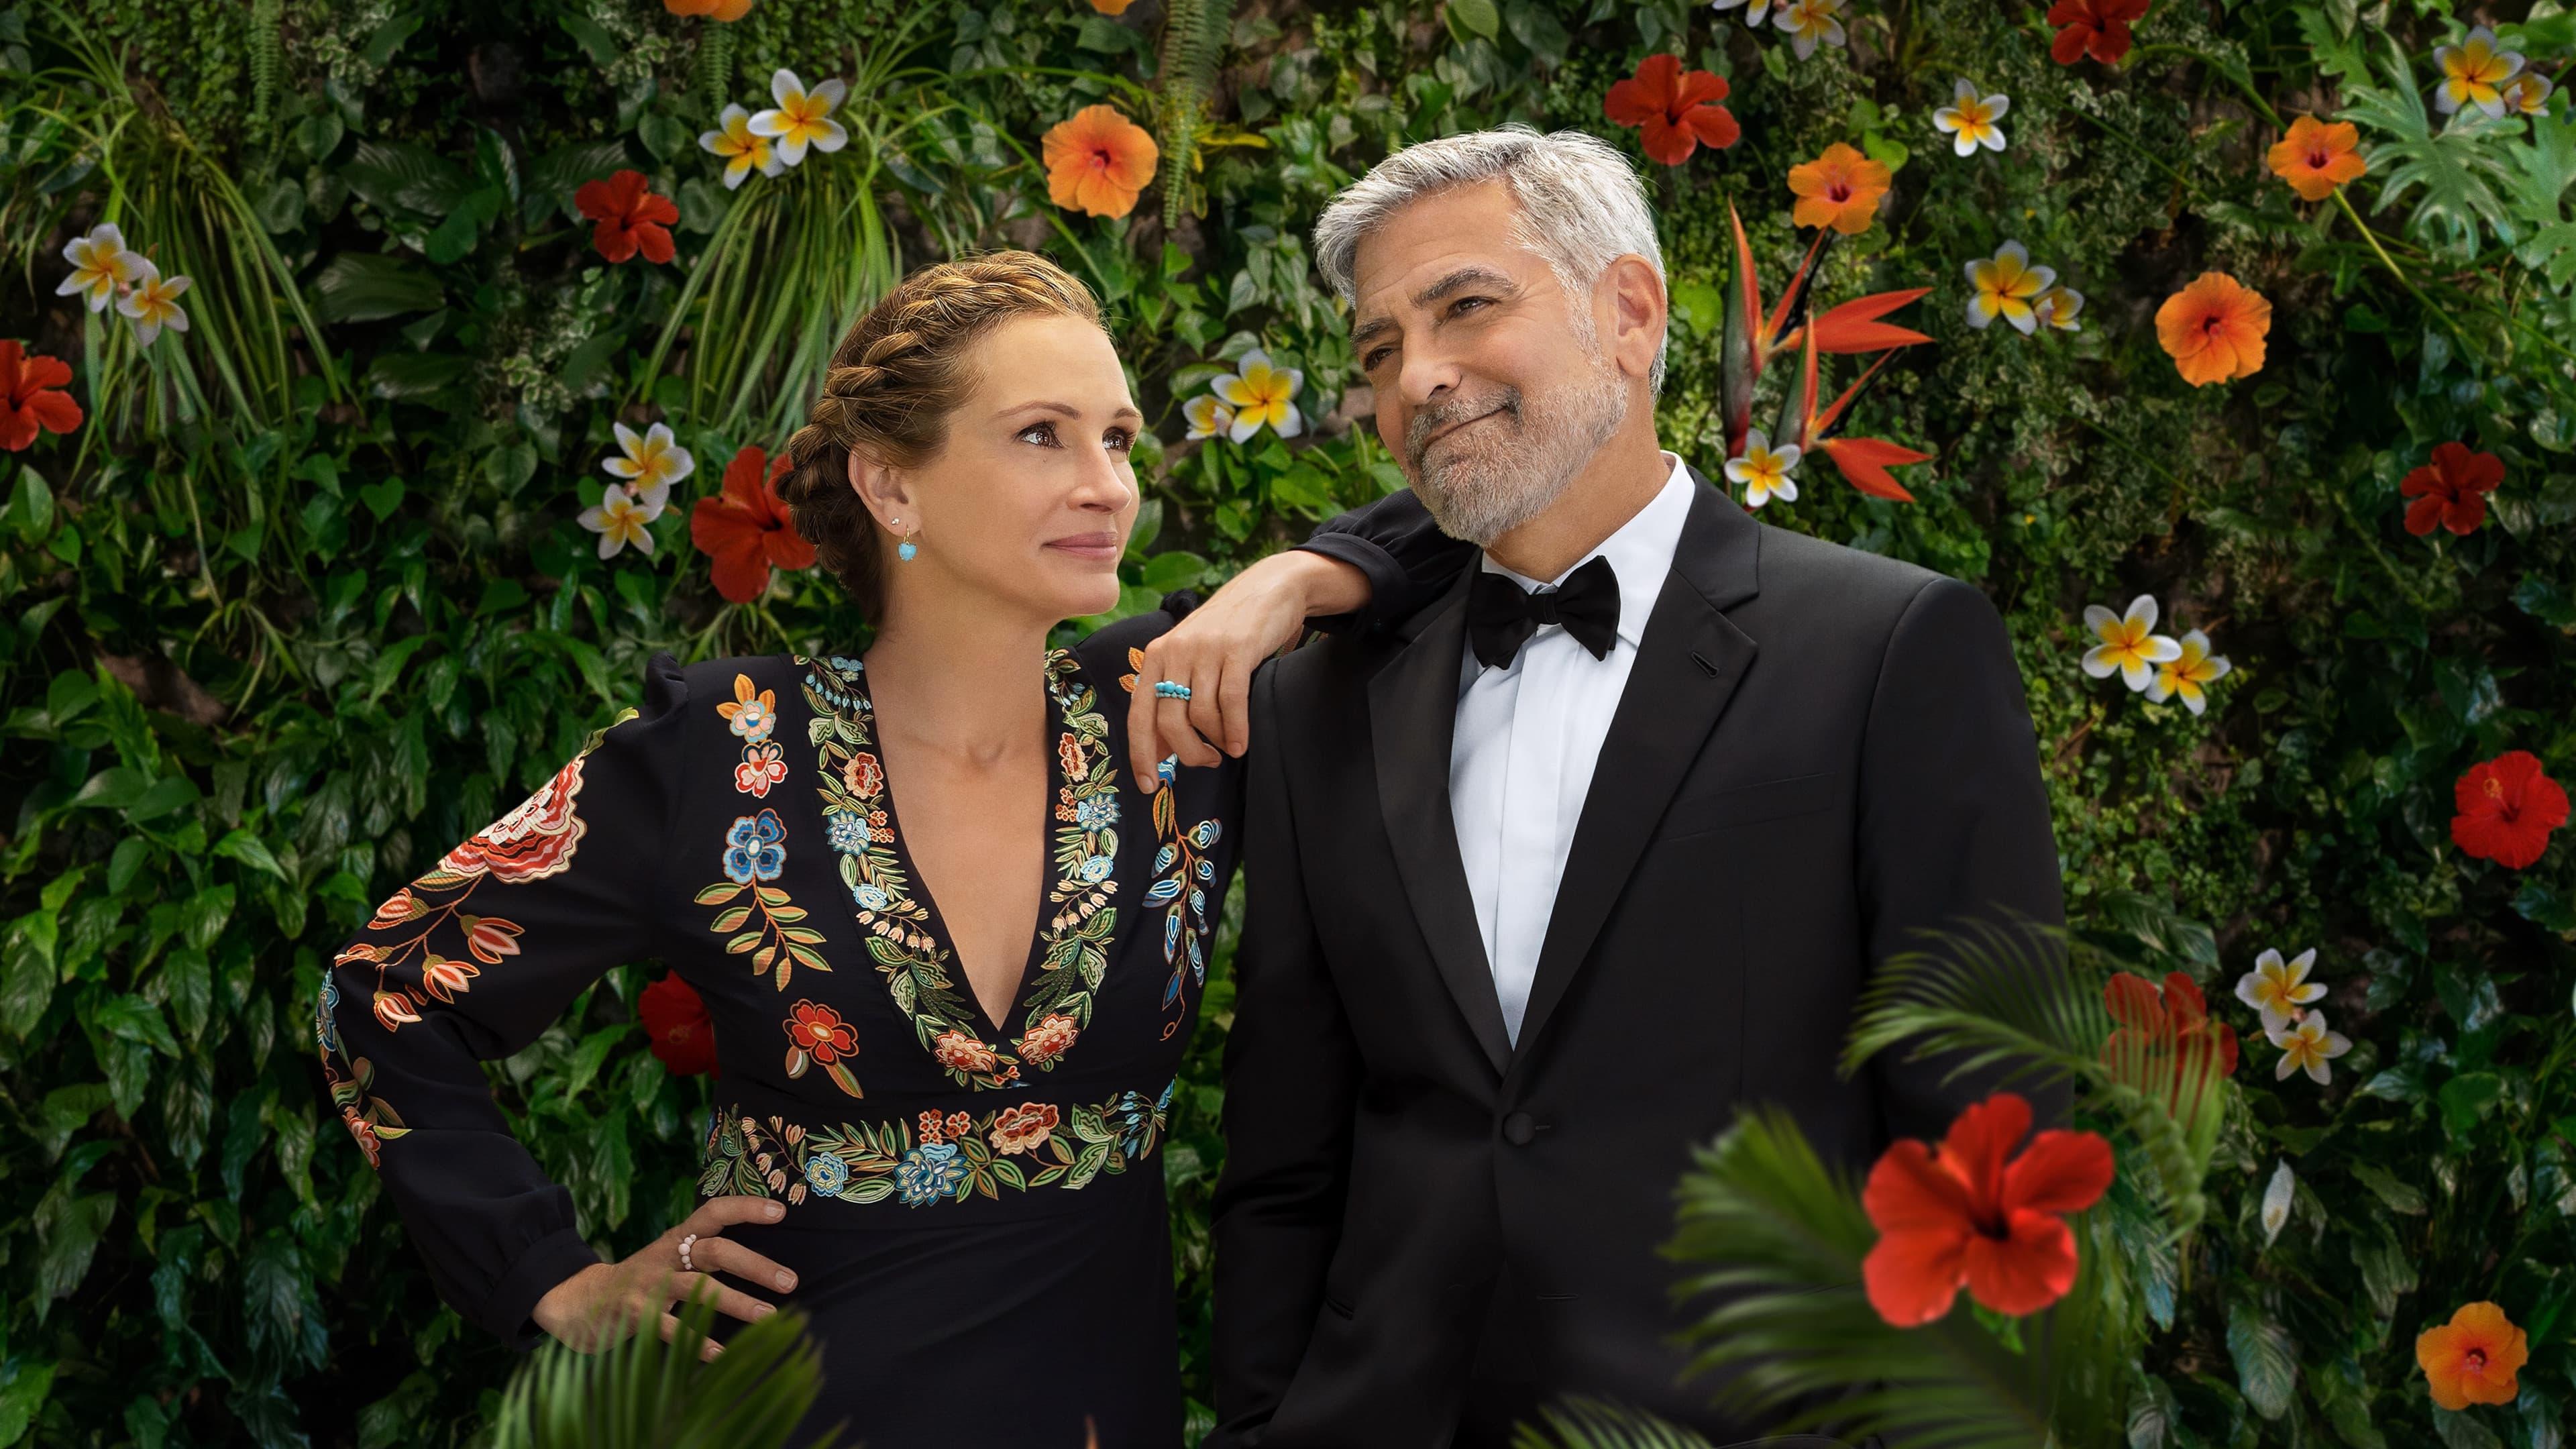 George Clooney stars alongside Julia Roberts in the new rom-com, Ticket to Paradise